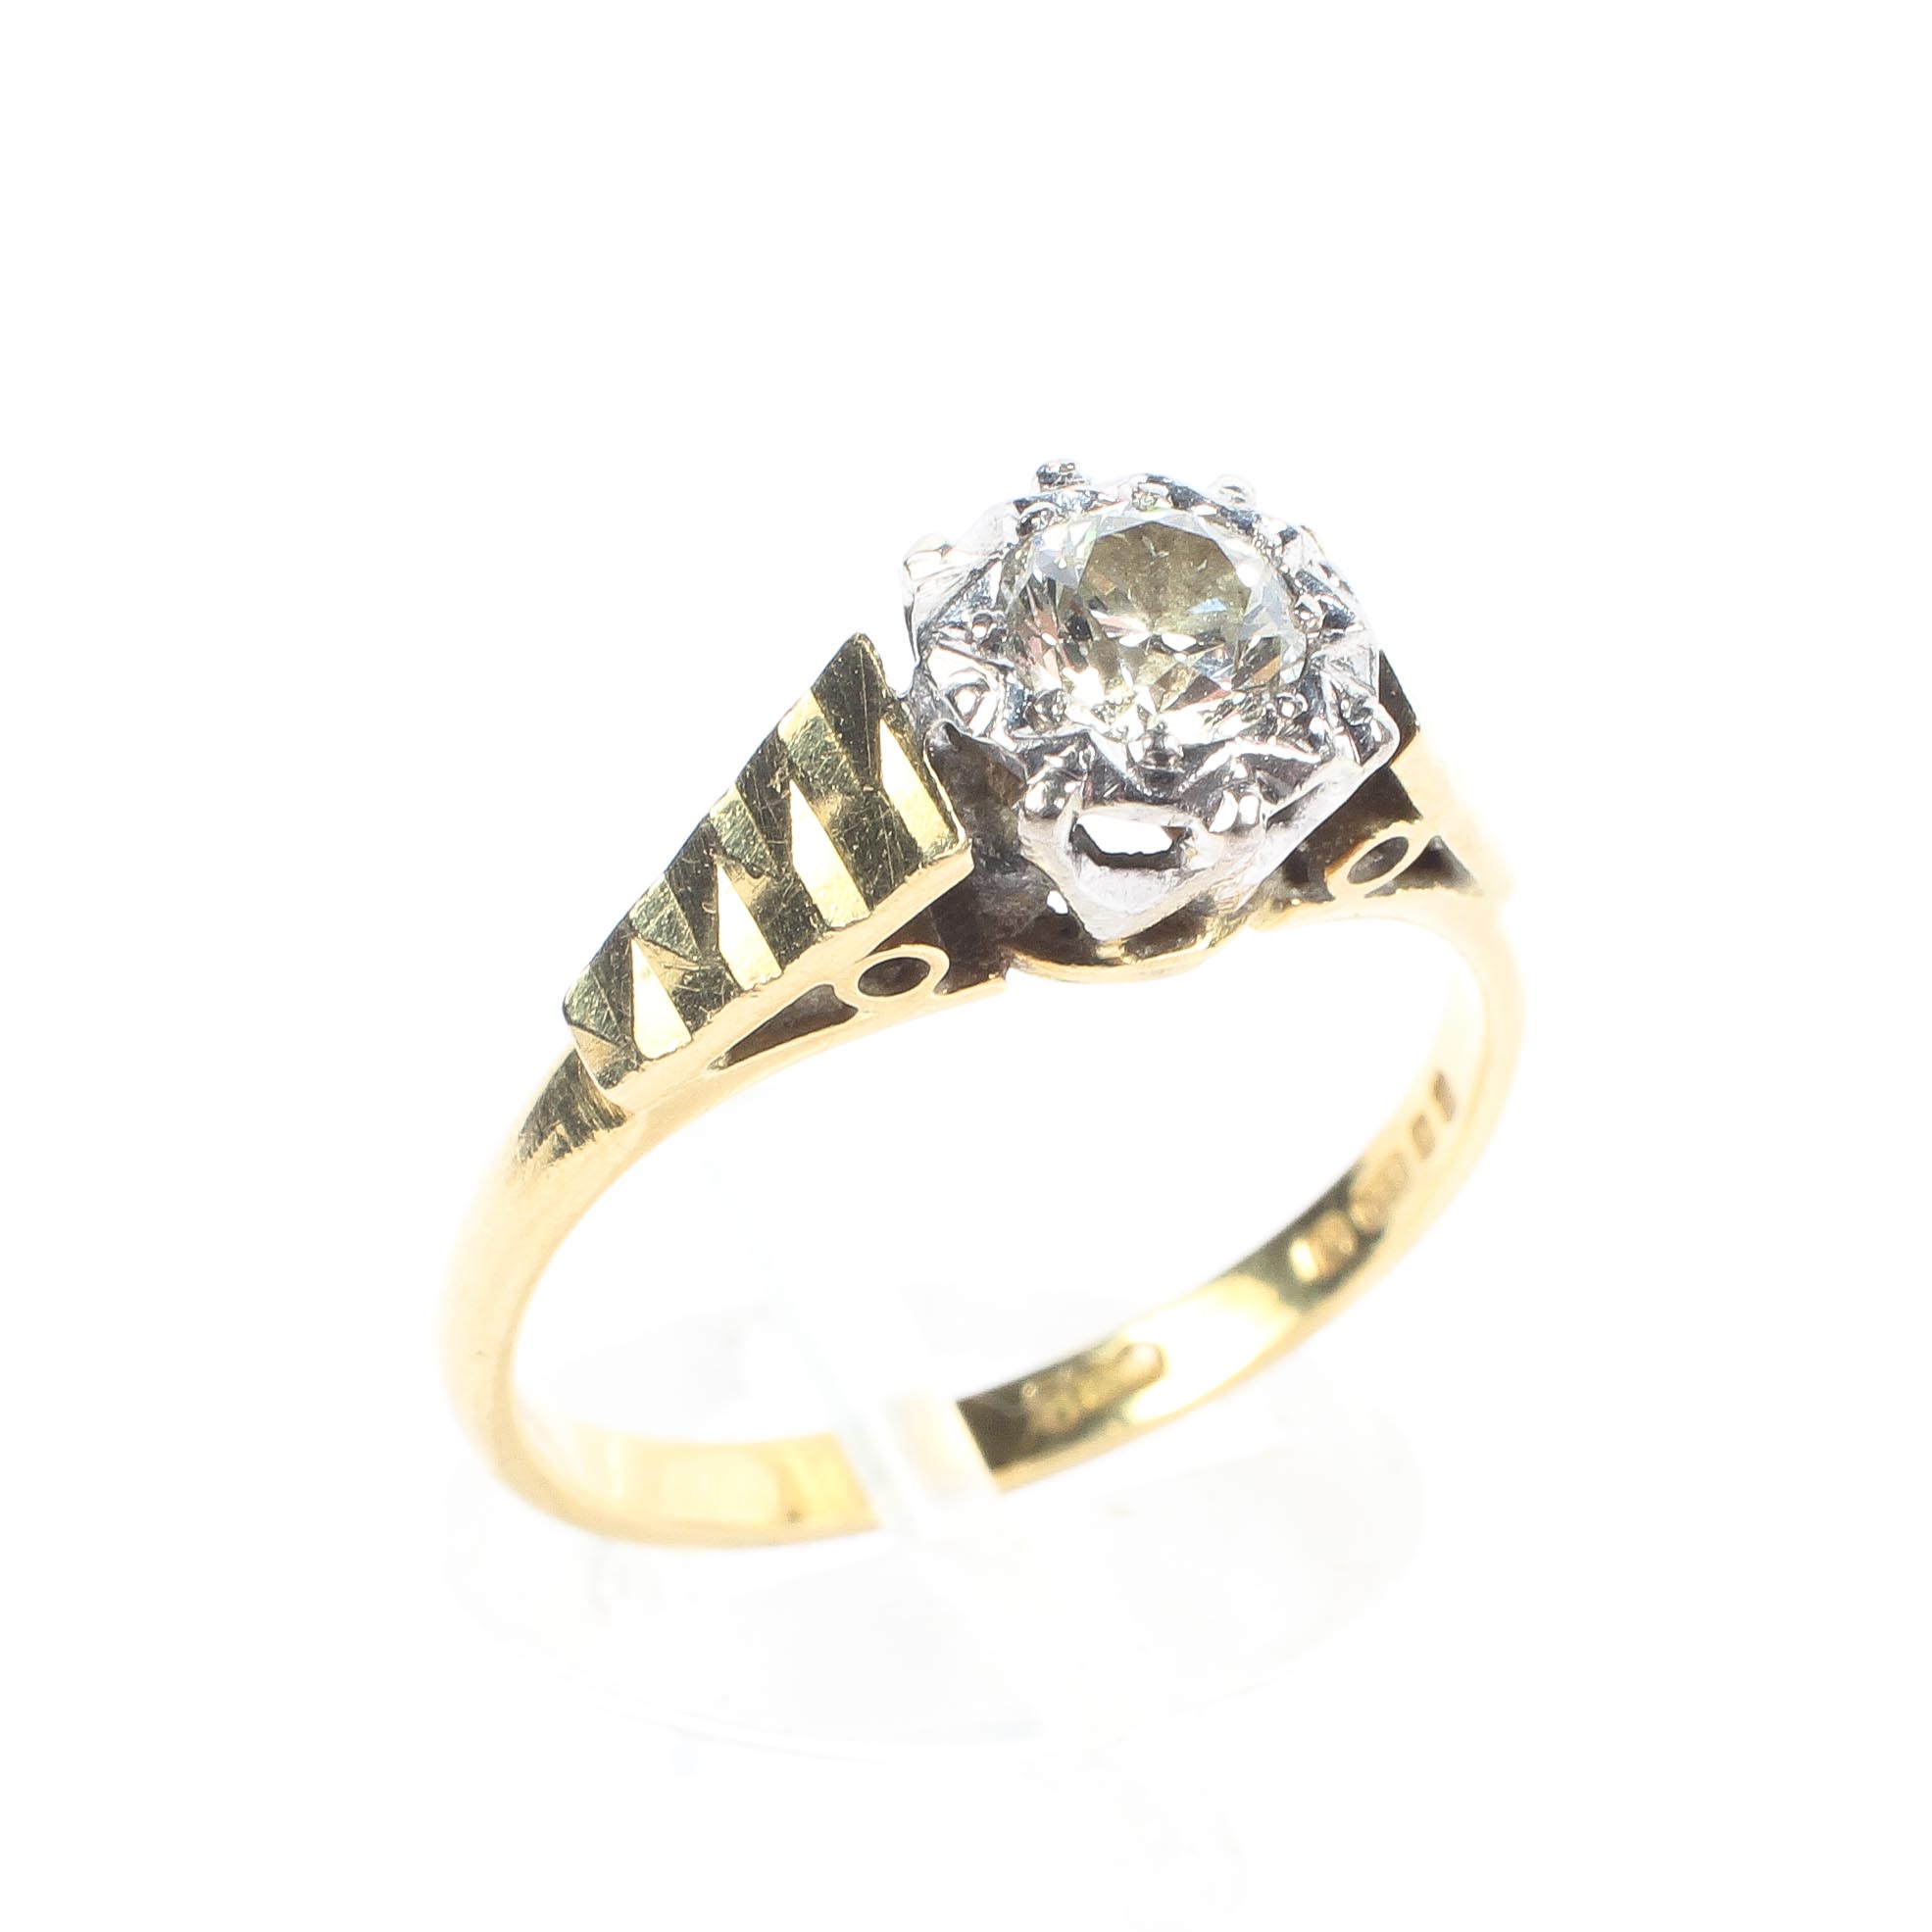 An 18ct yellow and white gold diamond solitaire ring,